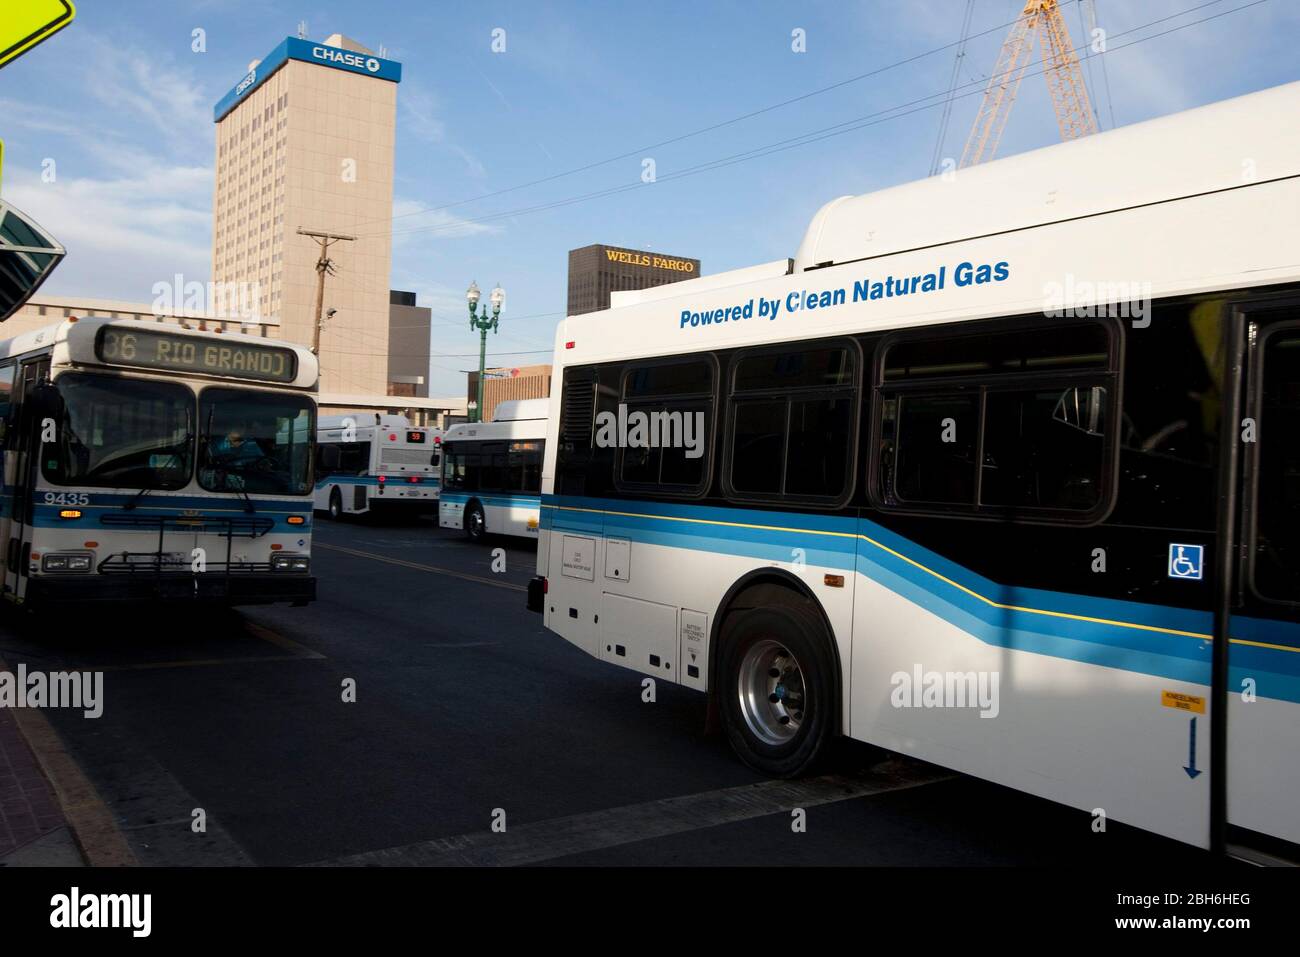 El Paso, Texas May 14, 2009: Scenes from the arts district downtown El Paso, TX showing city buses powered by natural gas at the downtown bus terminal.  ©Bob Daemmrich Stock Photo